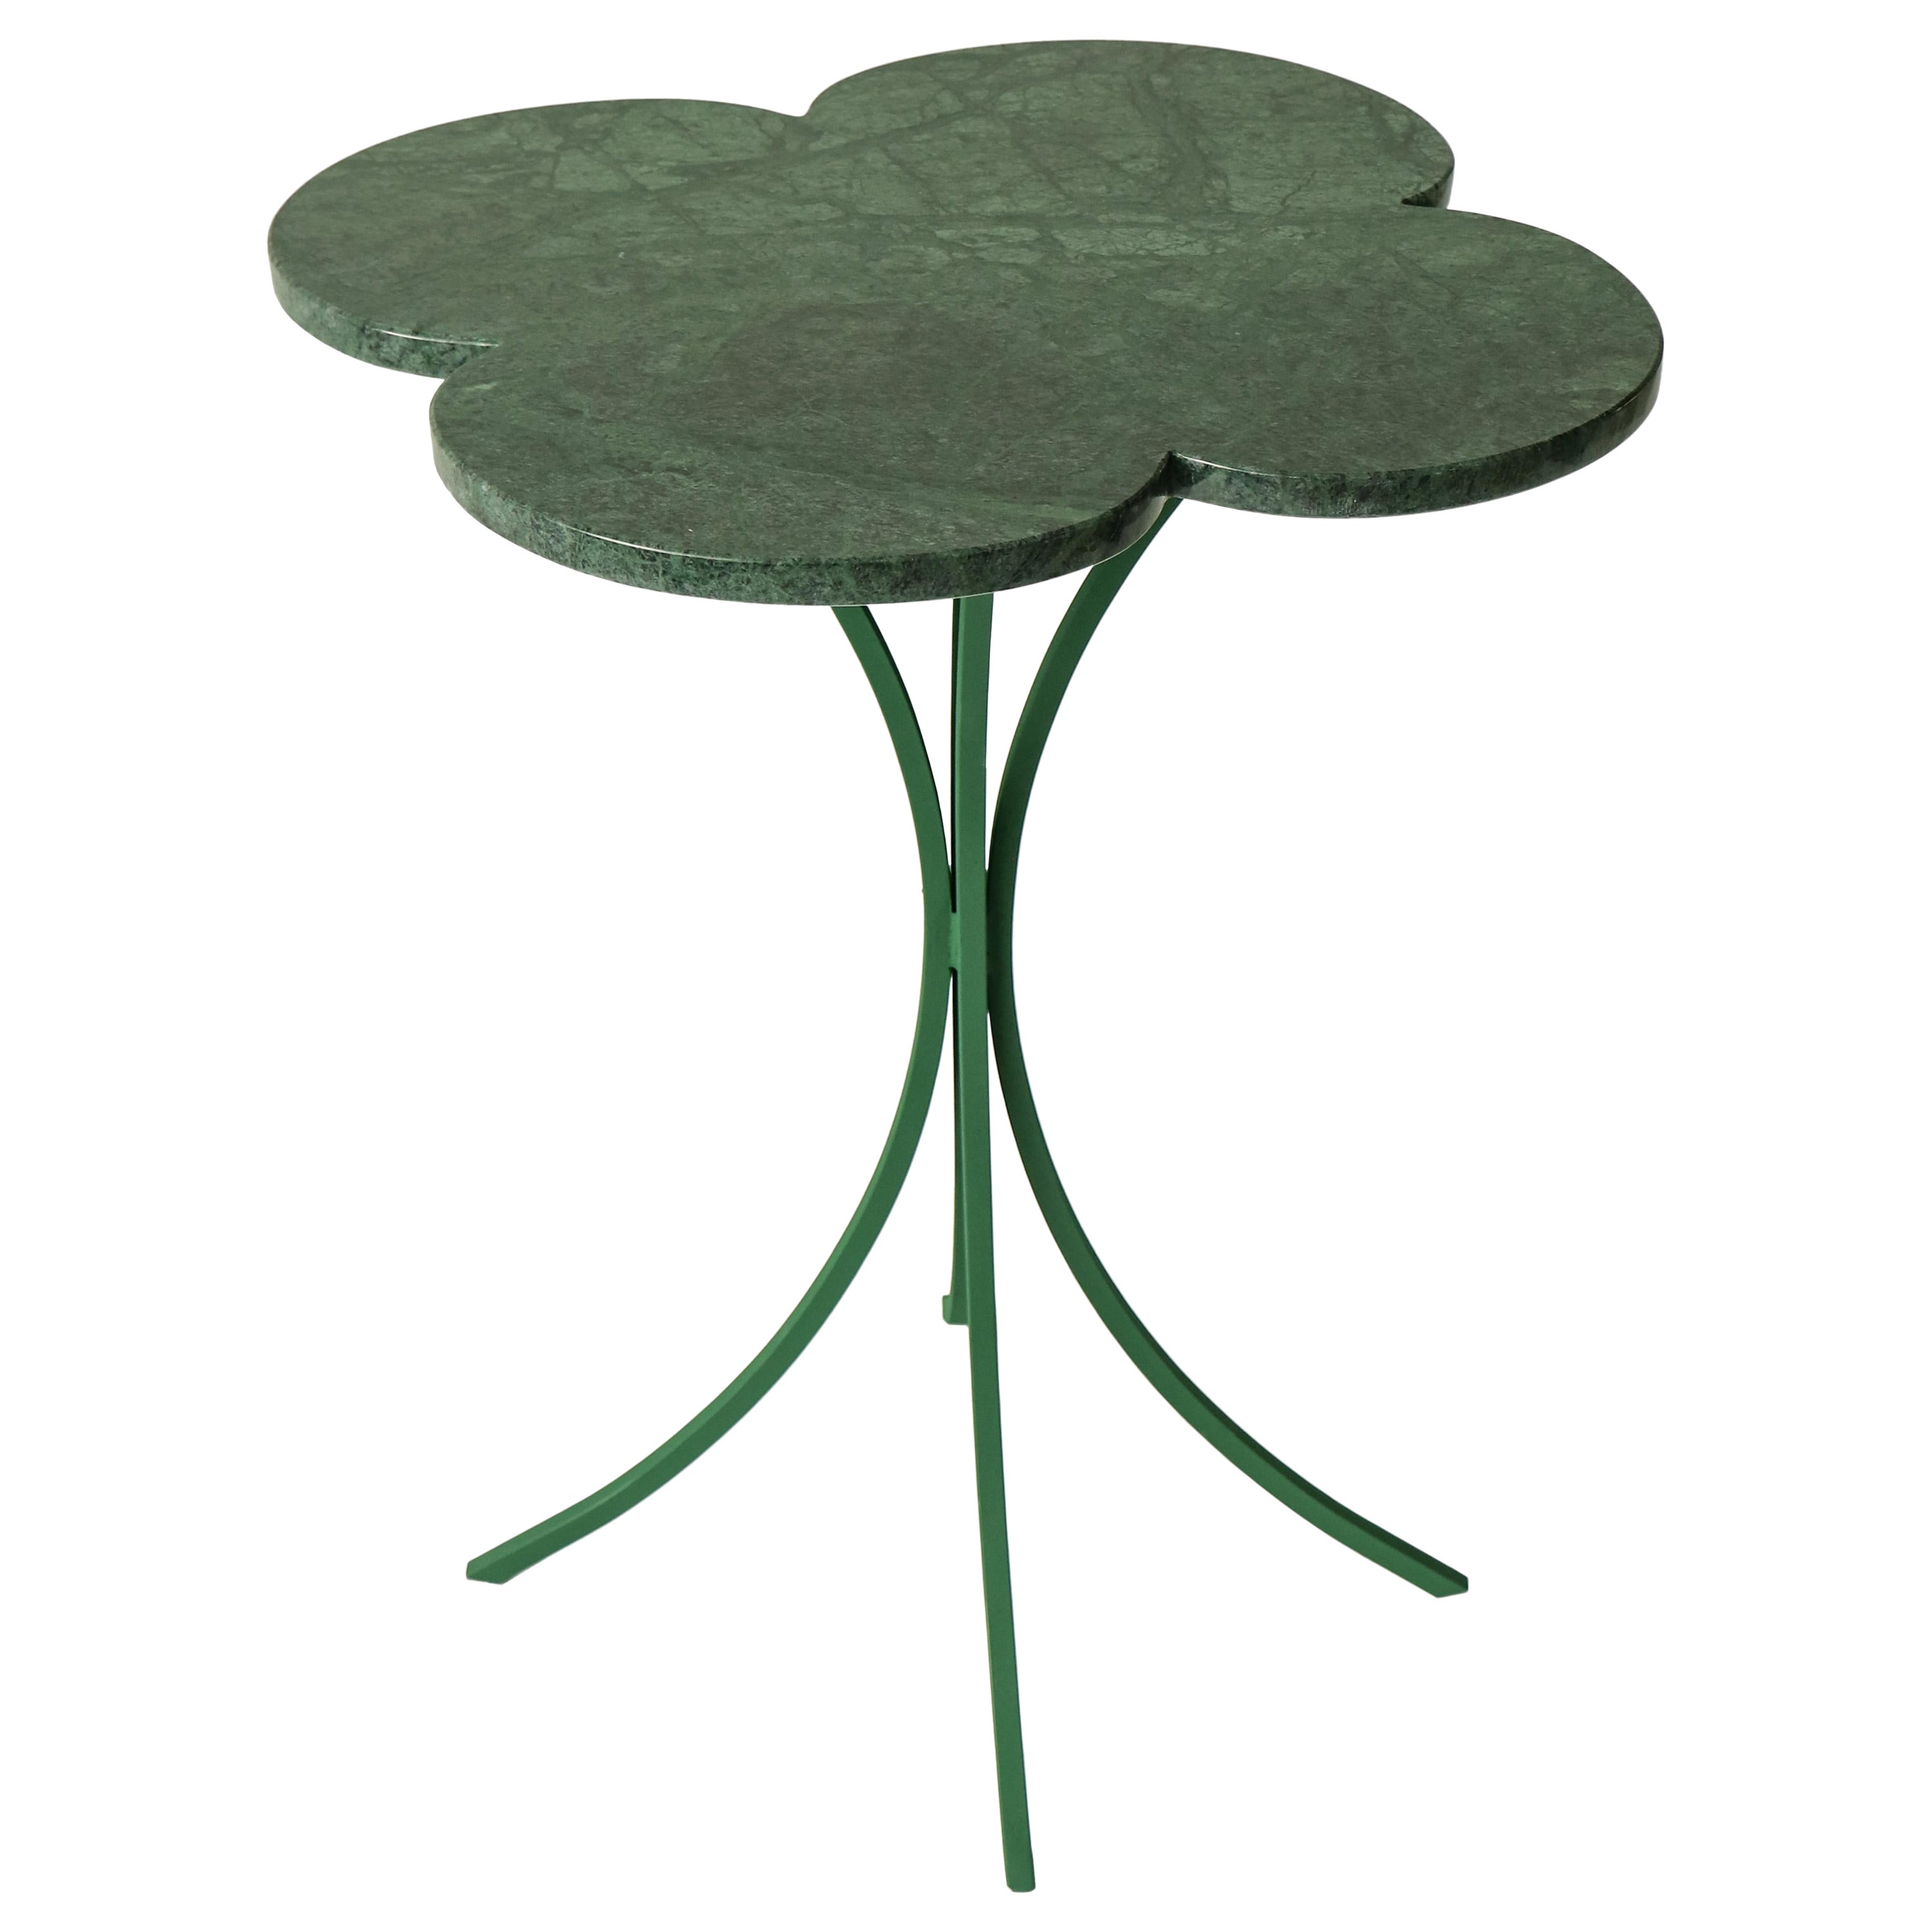 Green Natural Stone Indian Marble Clover Flower Coffee Bedside Table For Sale